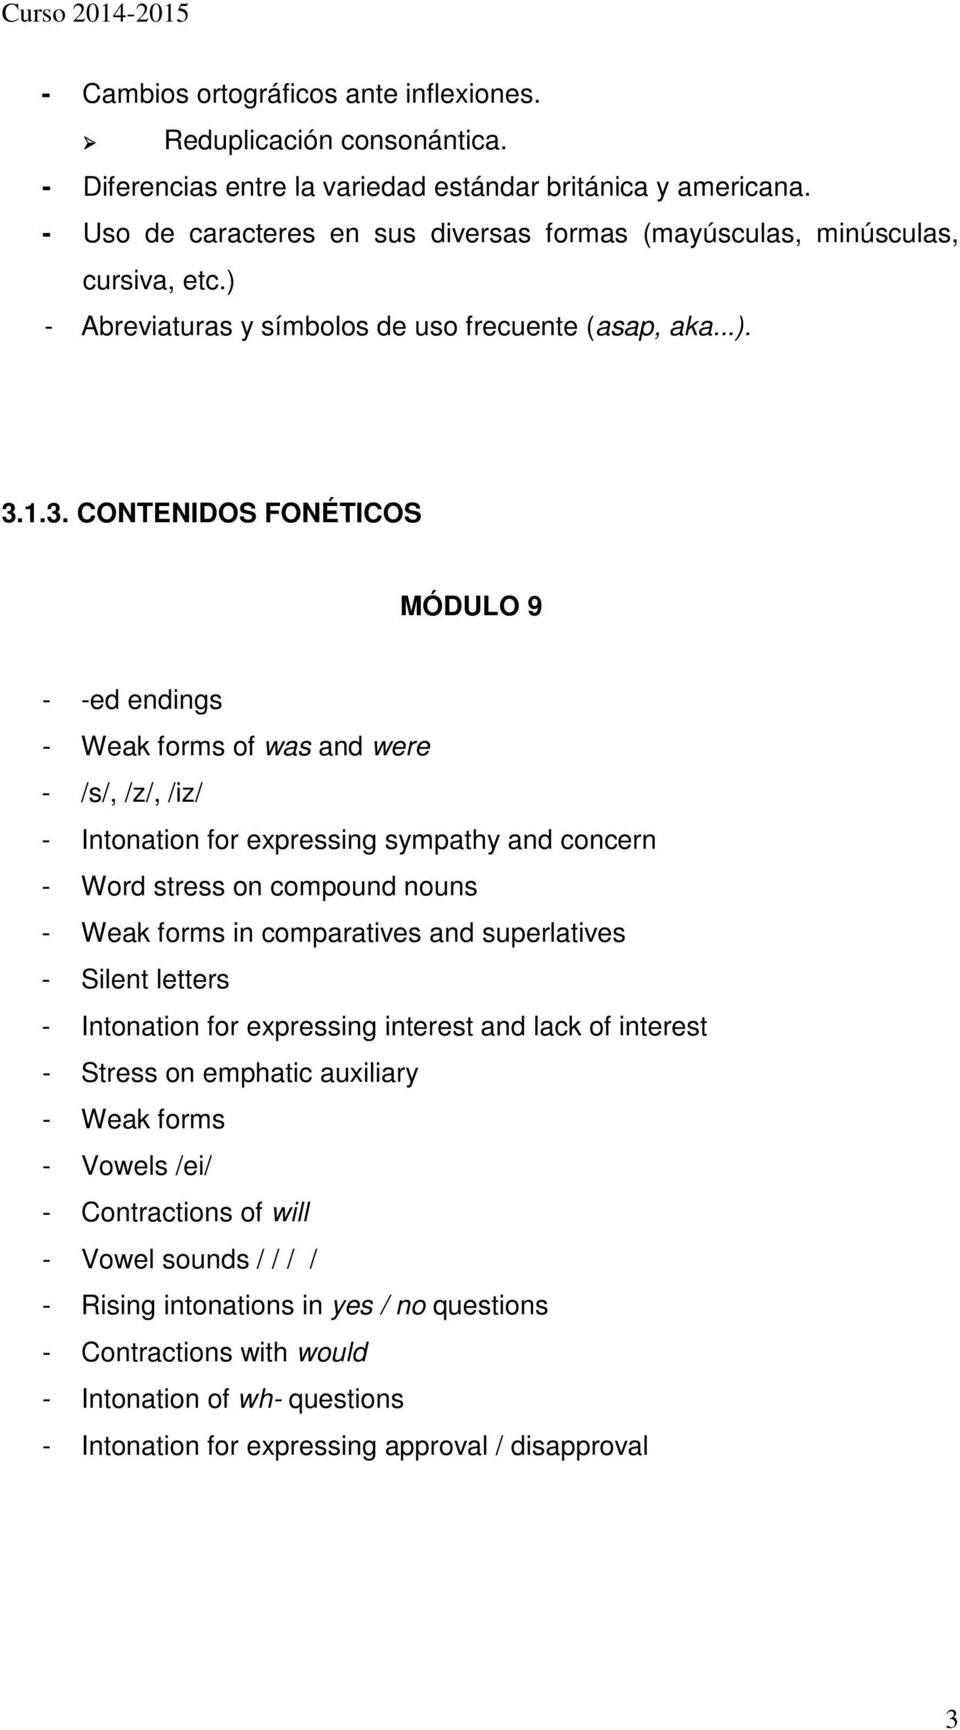 1.3. CONTENIDOS FONÉTICOS MÓDULO 9 - -ed endings - Weak forms of was and were - /s/, /z/, /iz/ - Intonation for expressing sympathy and concern - Word stress on compound nouns - Weak forms in